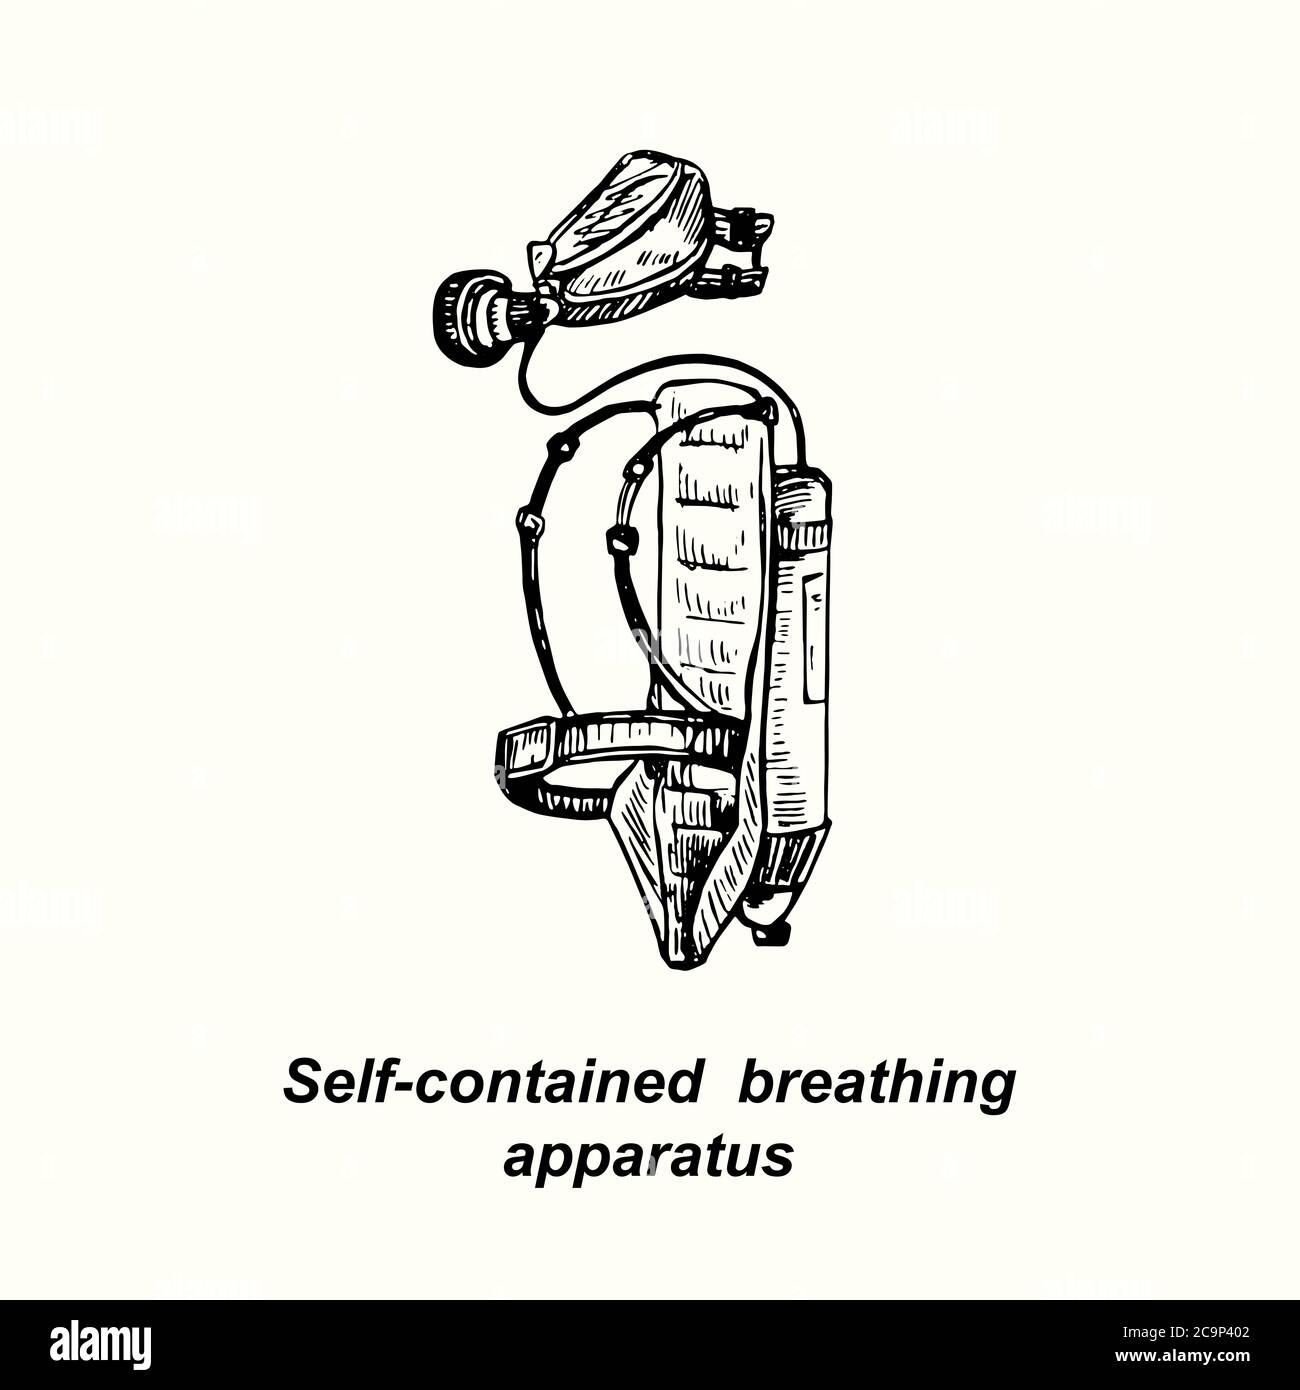 Self-contained breathing apparatus isolated, outline simple doodle drawing Stock Photo